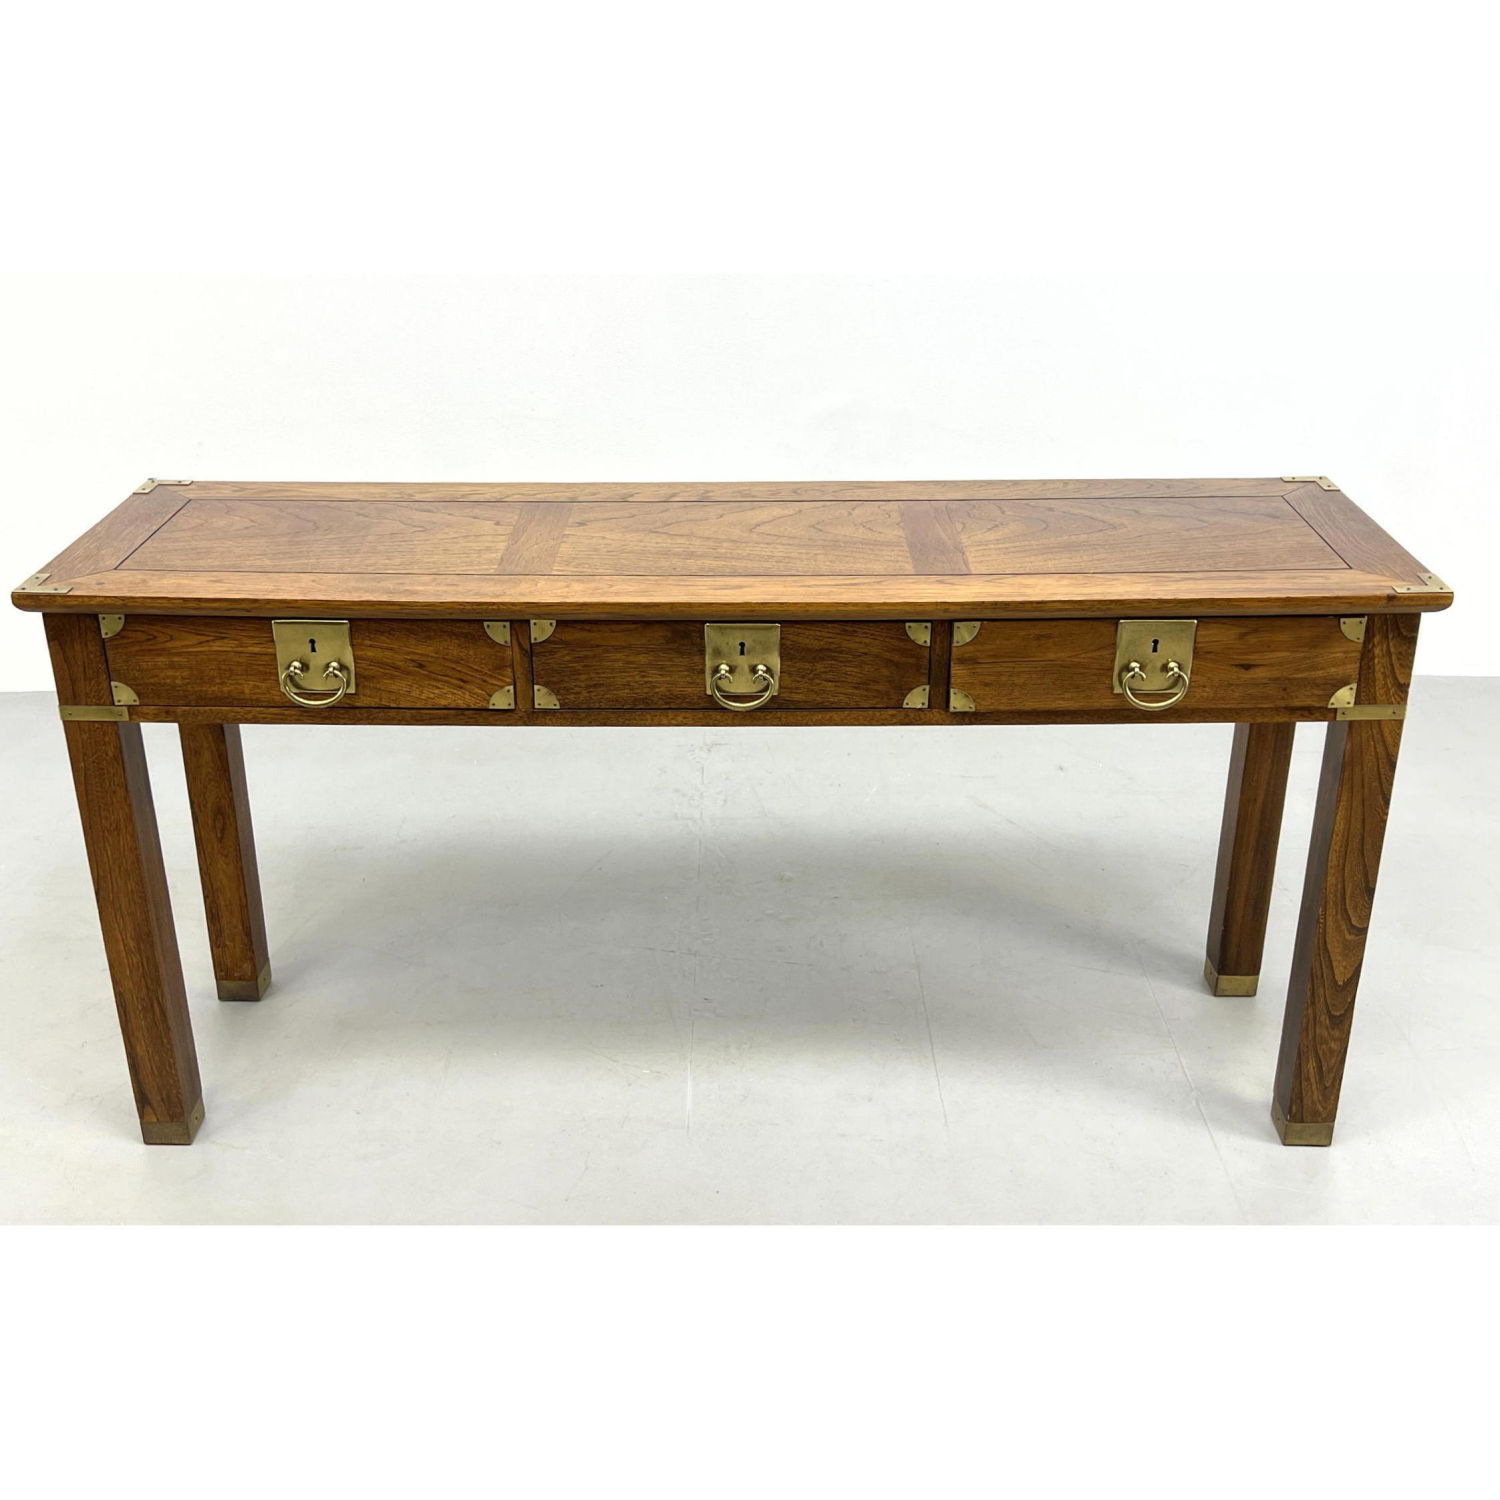 HEKMAN Console Hall Table. Brass